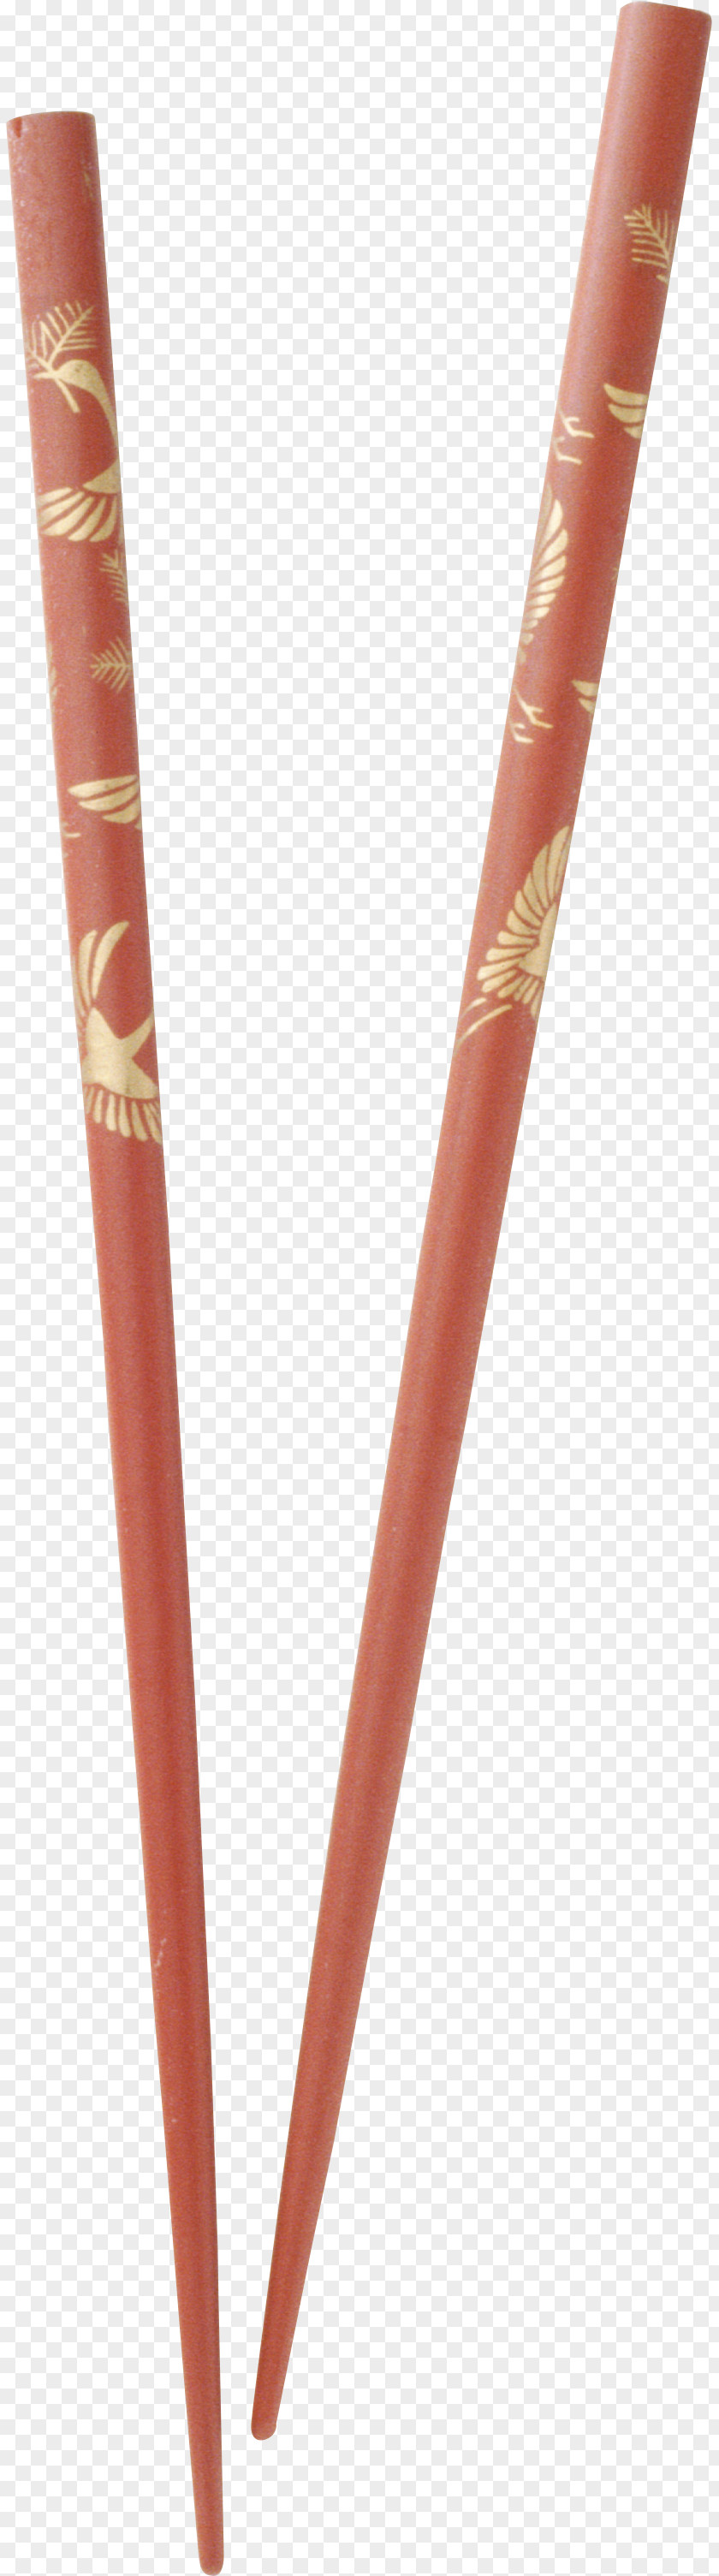 Drum Stick Sushi Chopsticks Spoon Chinese Cuisine PNG